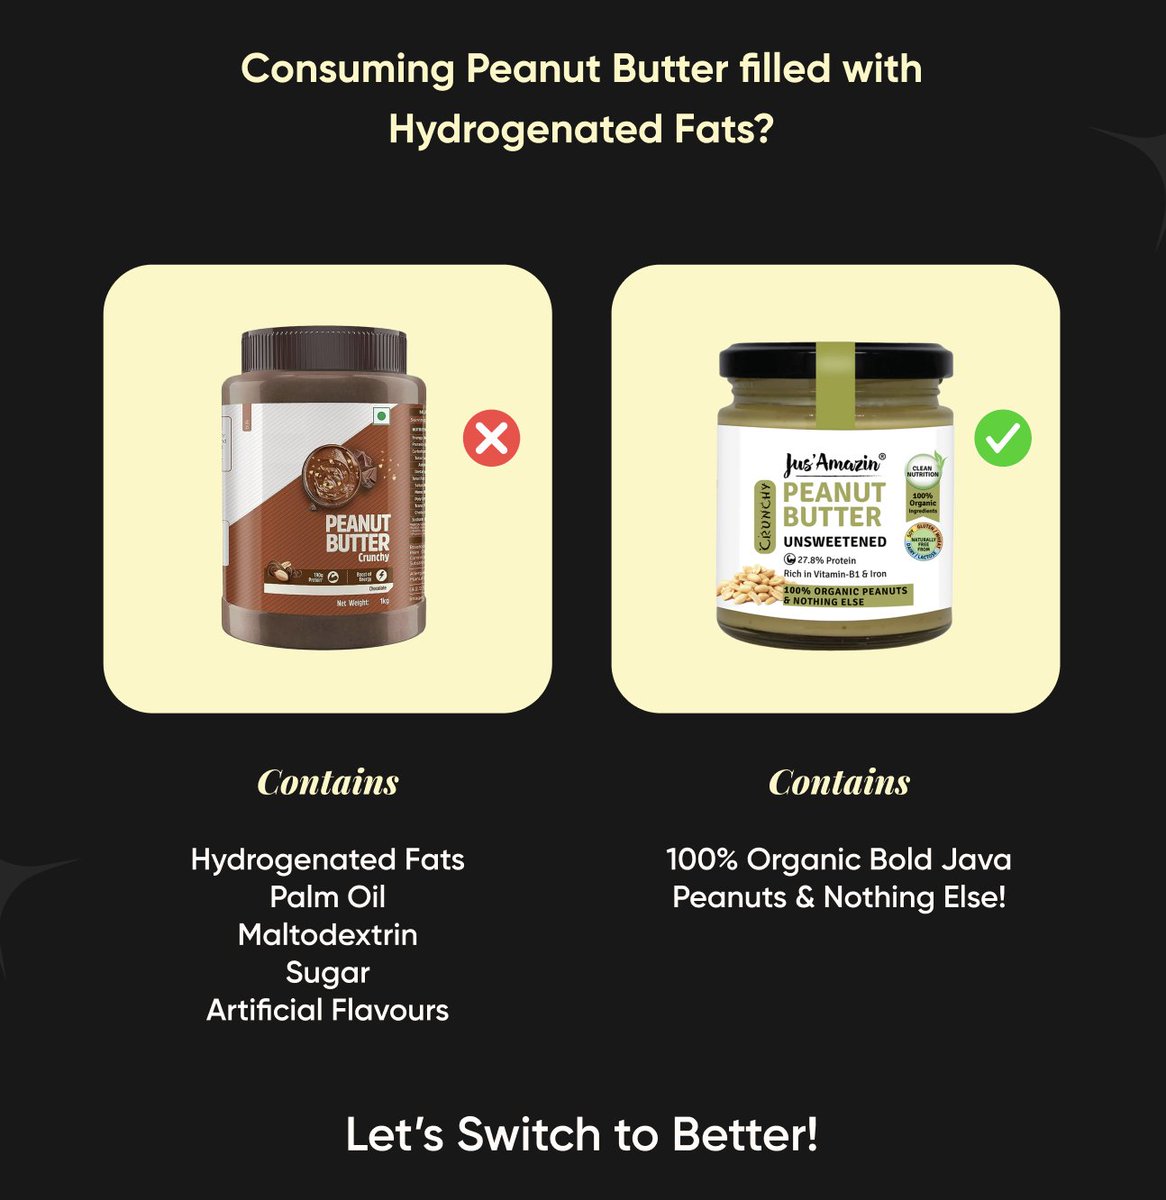 Shop Smart, Read labels first. Eat Better. Live Better❤️ #peanutbutter #healthyfood #proteinpacked #eatbetter #natural #unsweetened #thebettershop